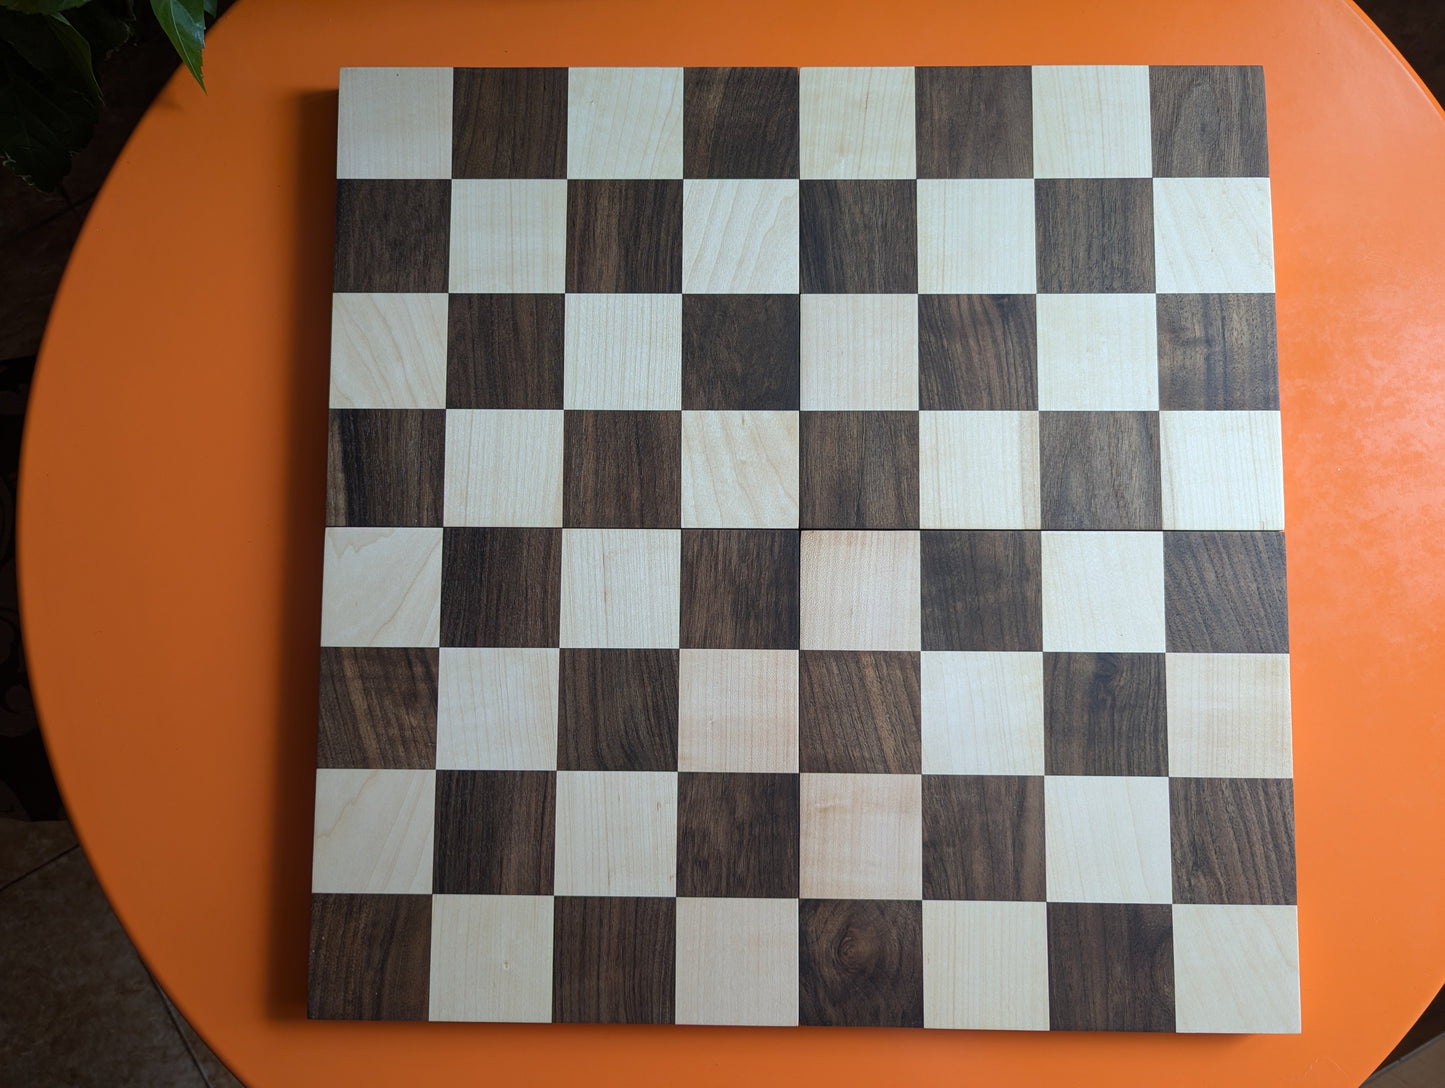 5.5" Handmade wood abstract artistic chess set in wooden box